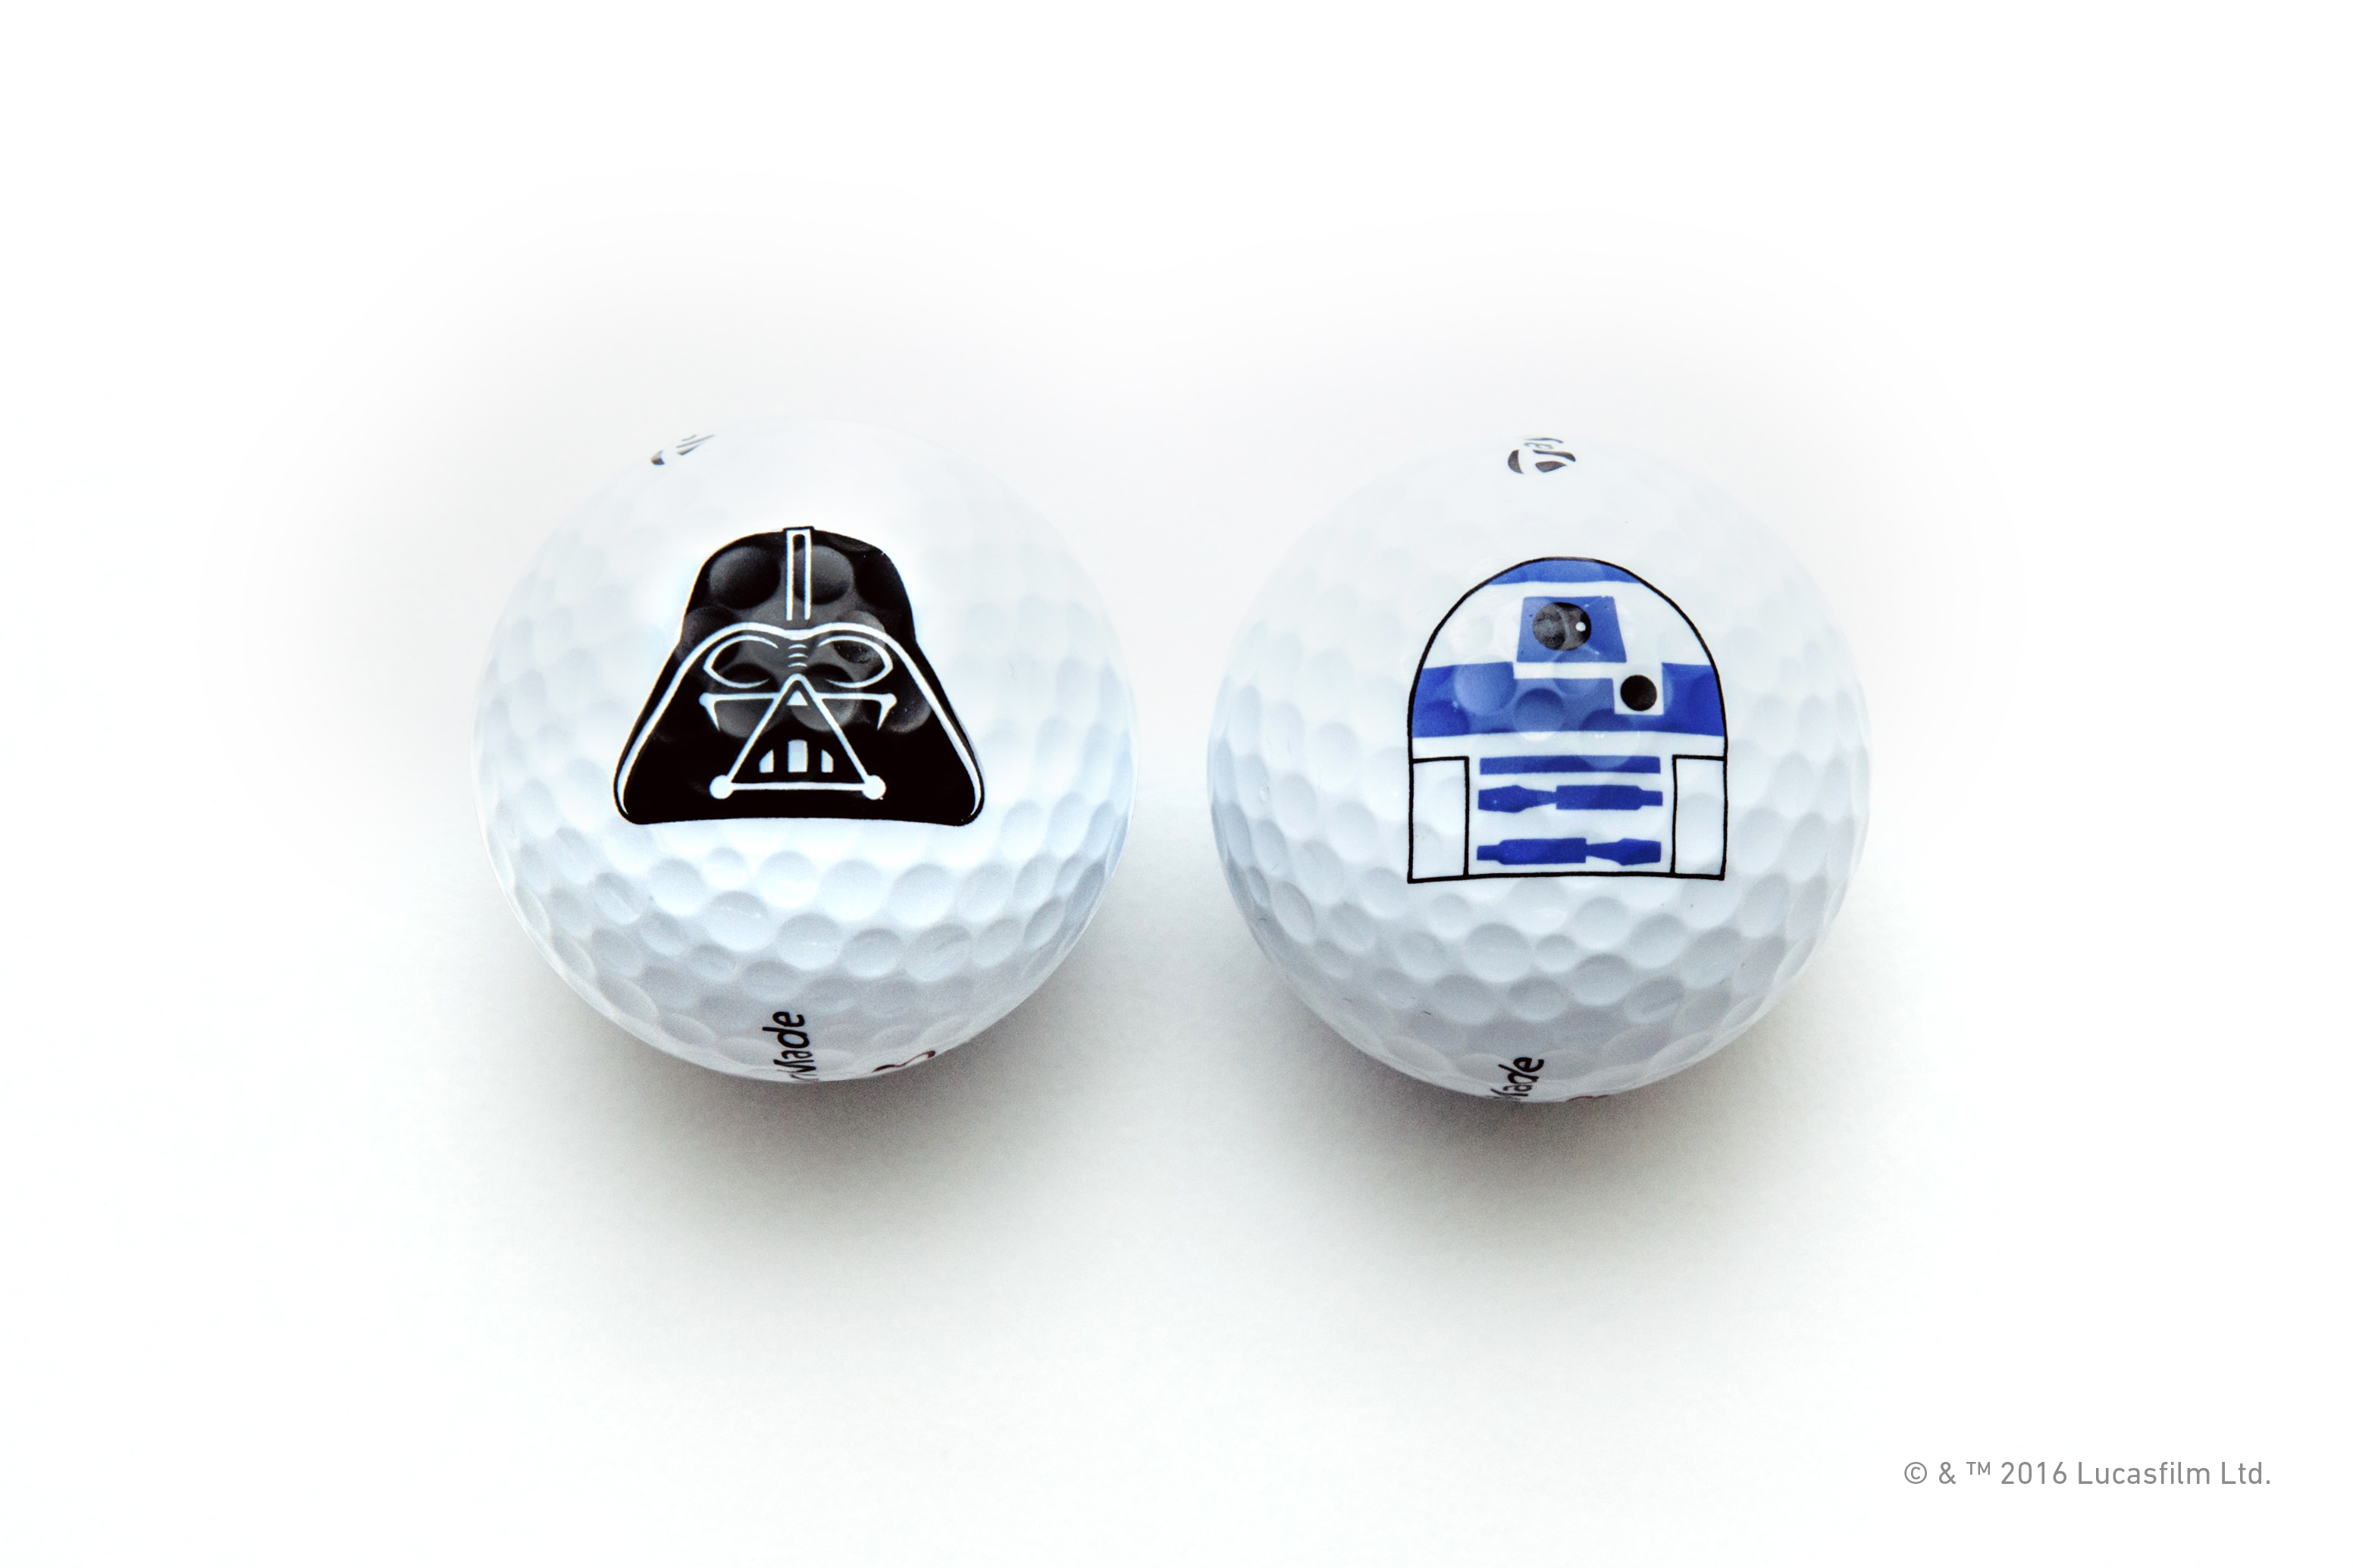 TaylorMade release Star Wars themed range